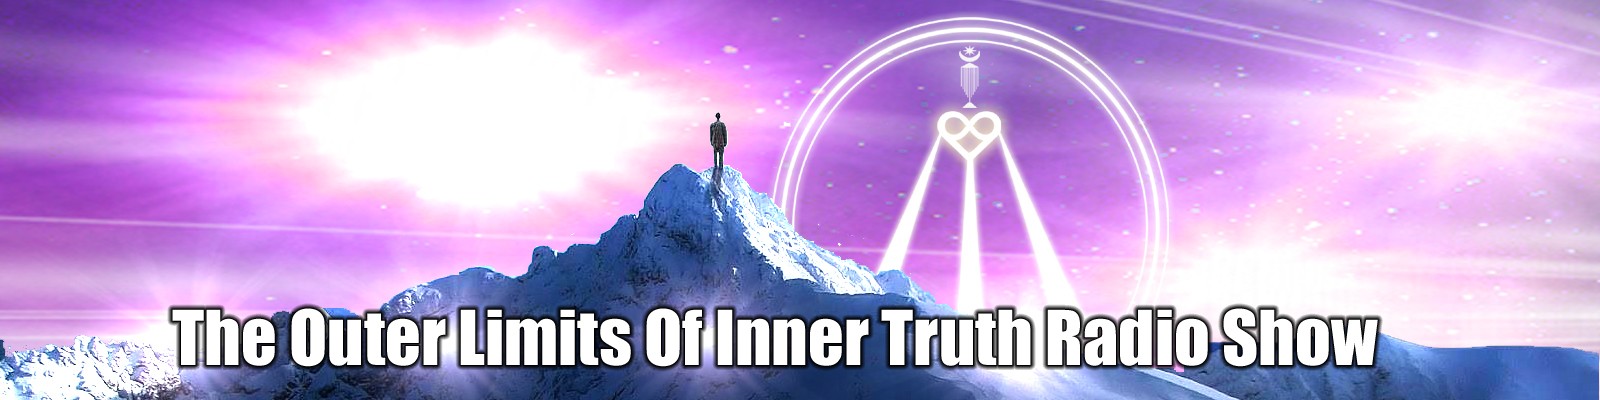 The Outer Limits Of Inner Truth Radio Show Banner